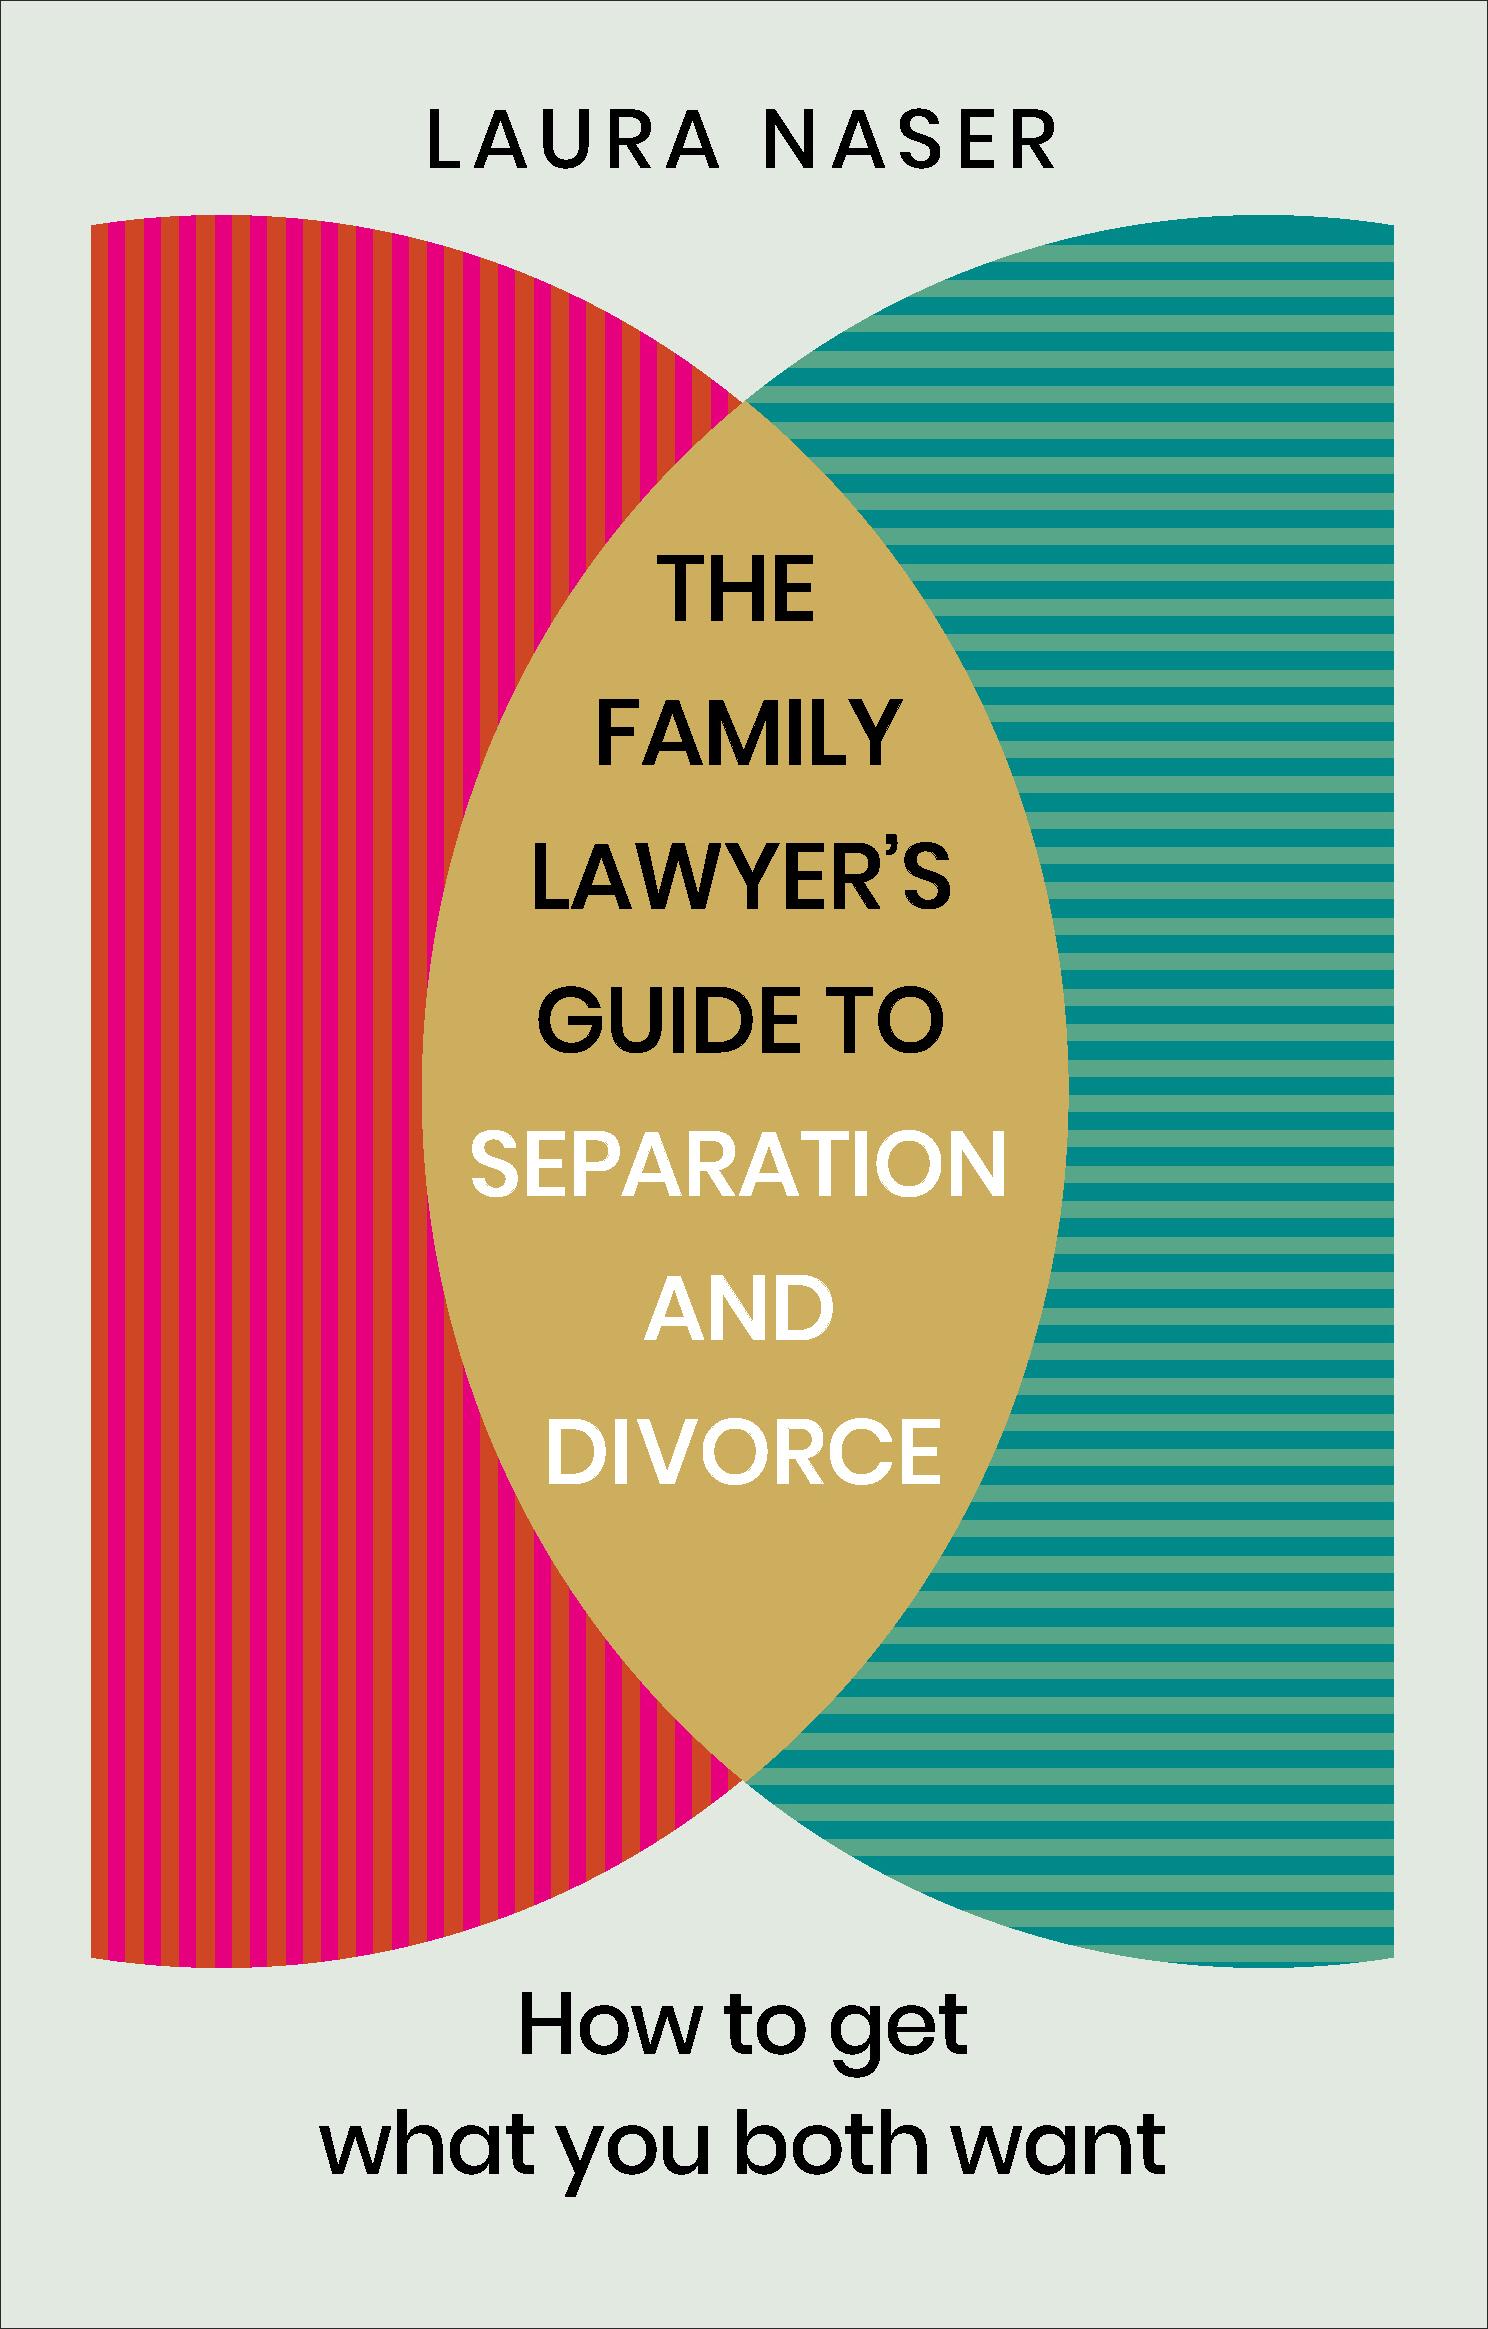 Family Lawyer's Guide to Separation and Divorce - Laura Naser